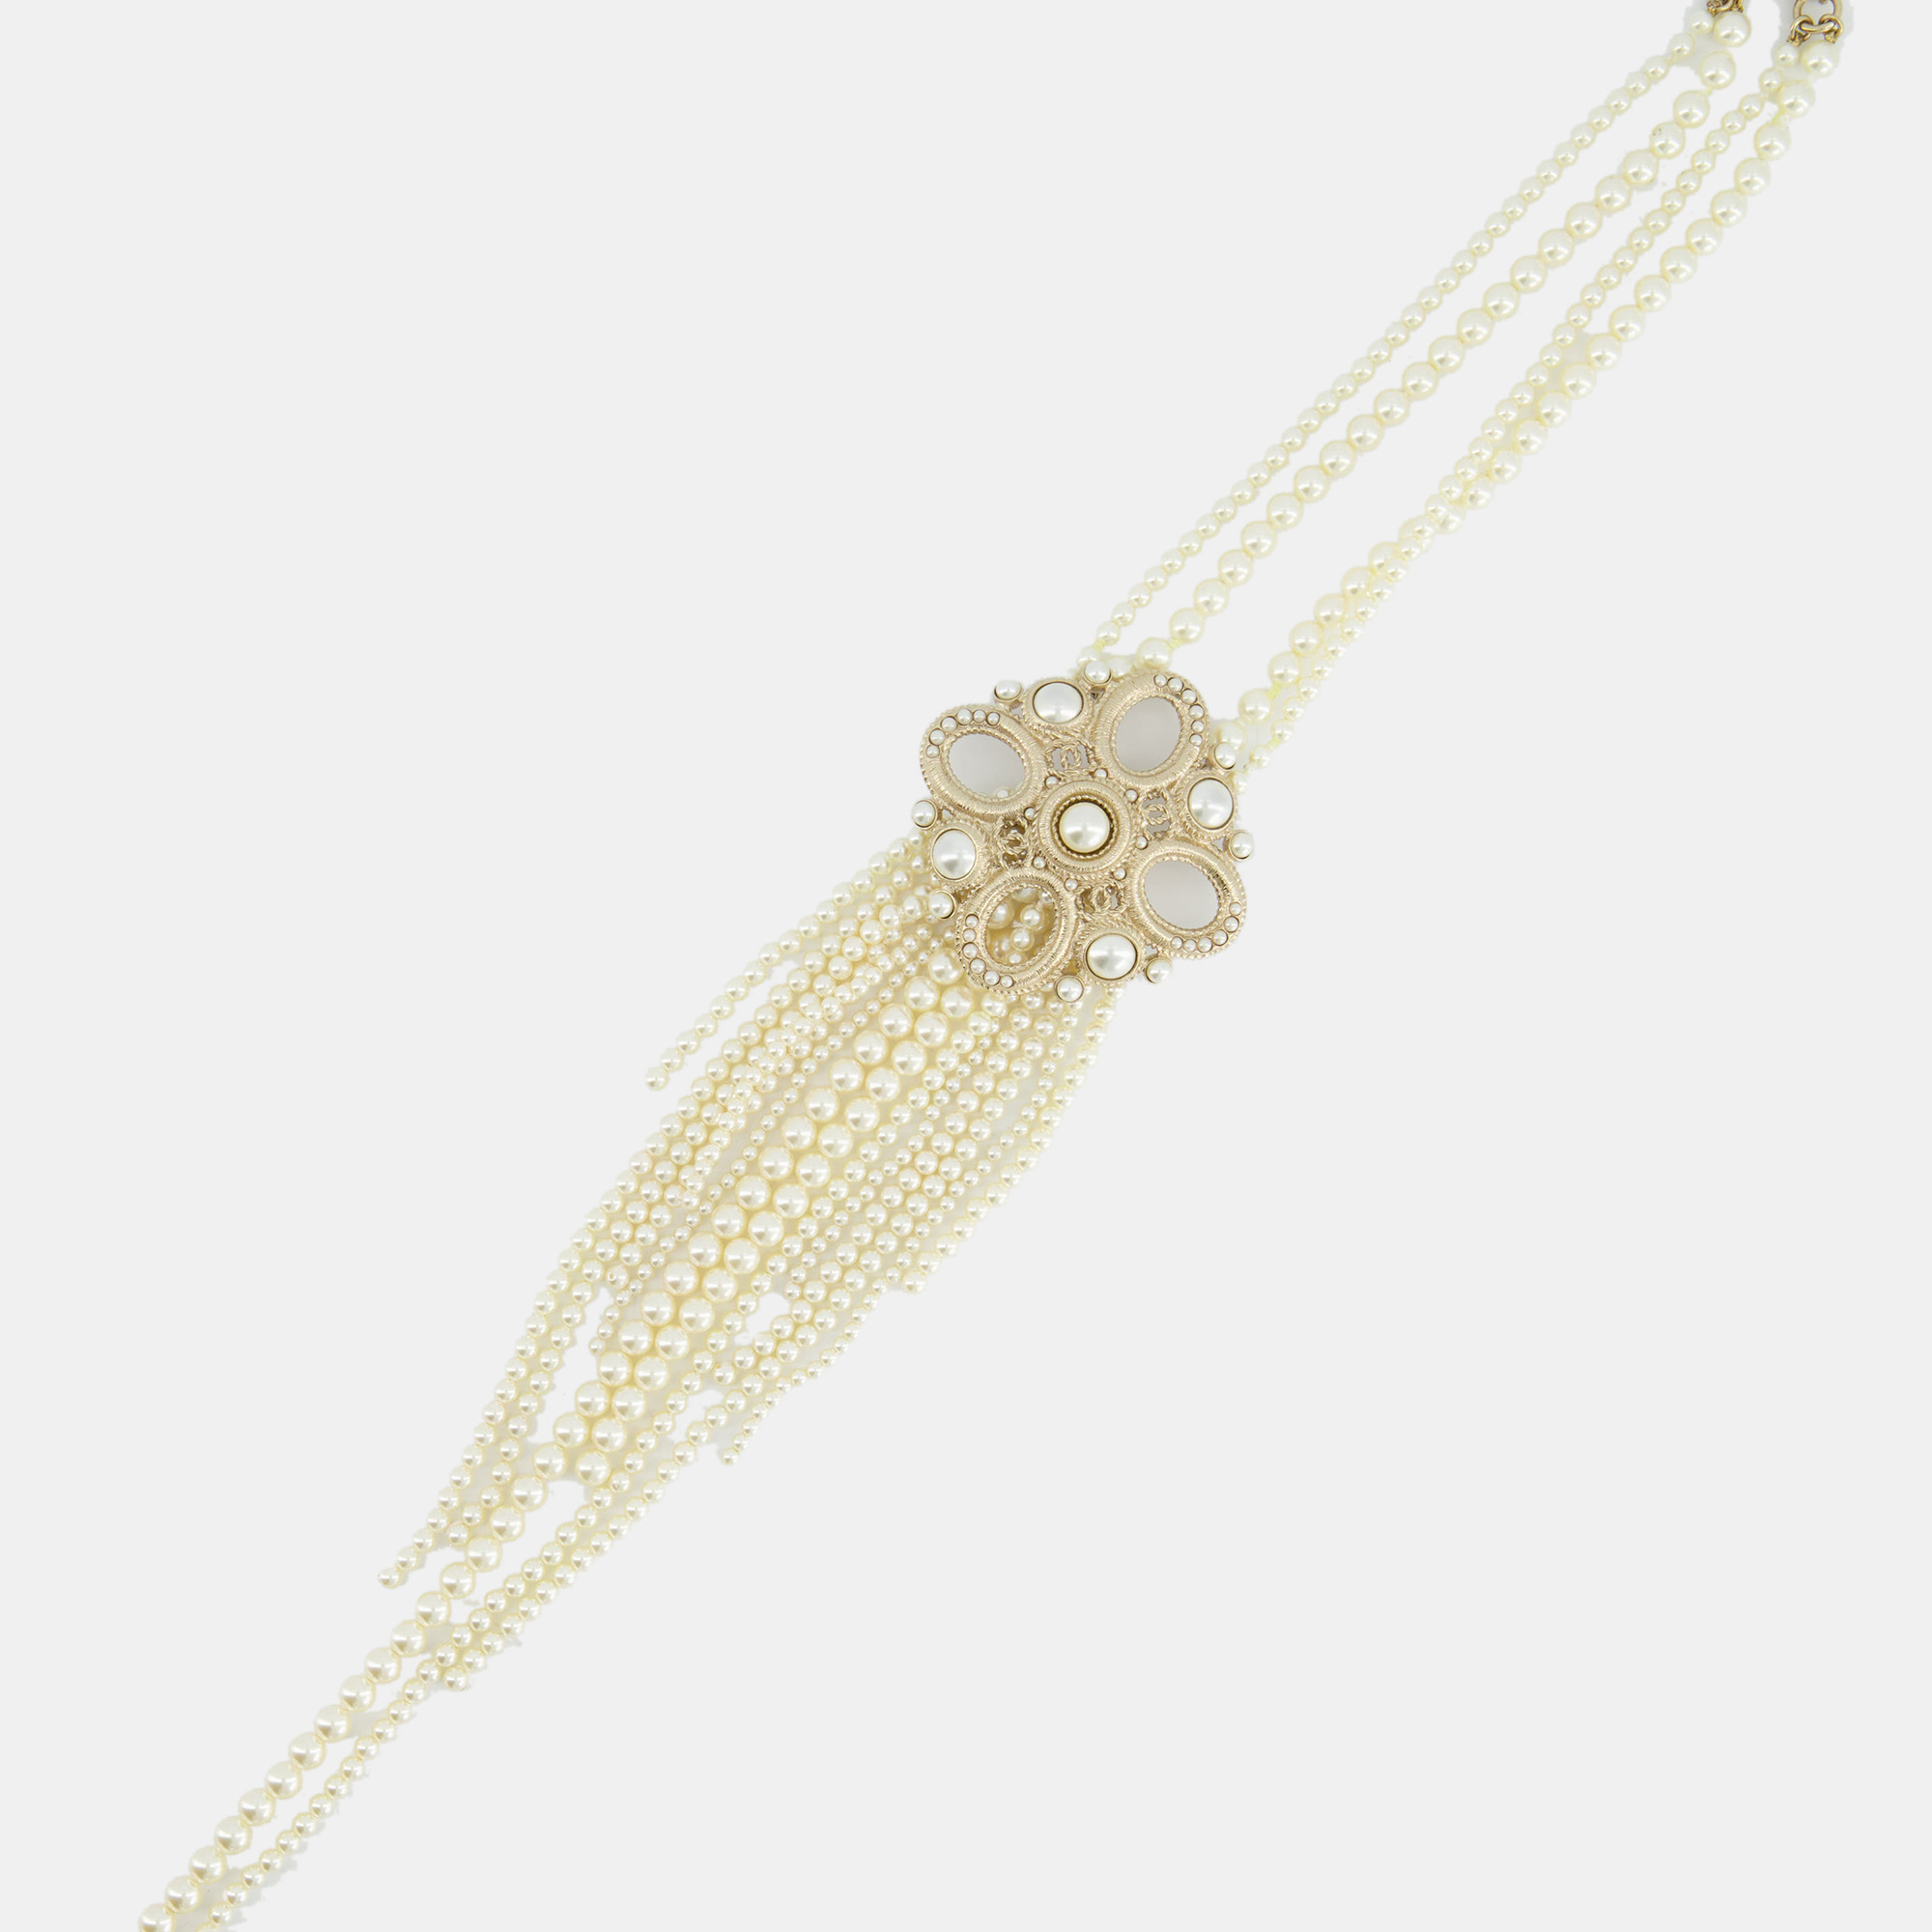 Chanel Choker Long Pearl Necklace With Antique Gold Pendant